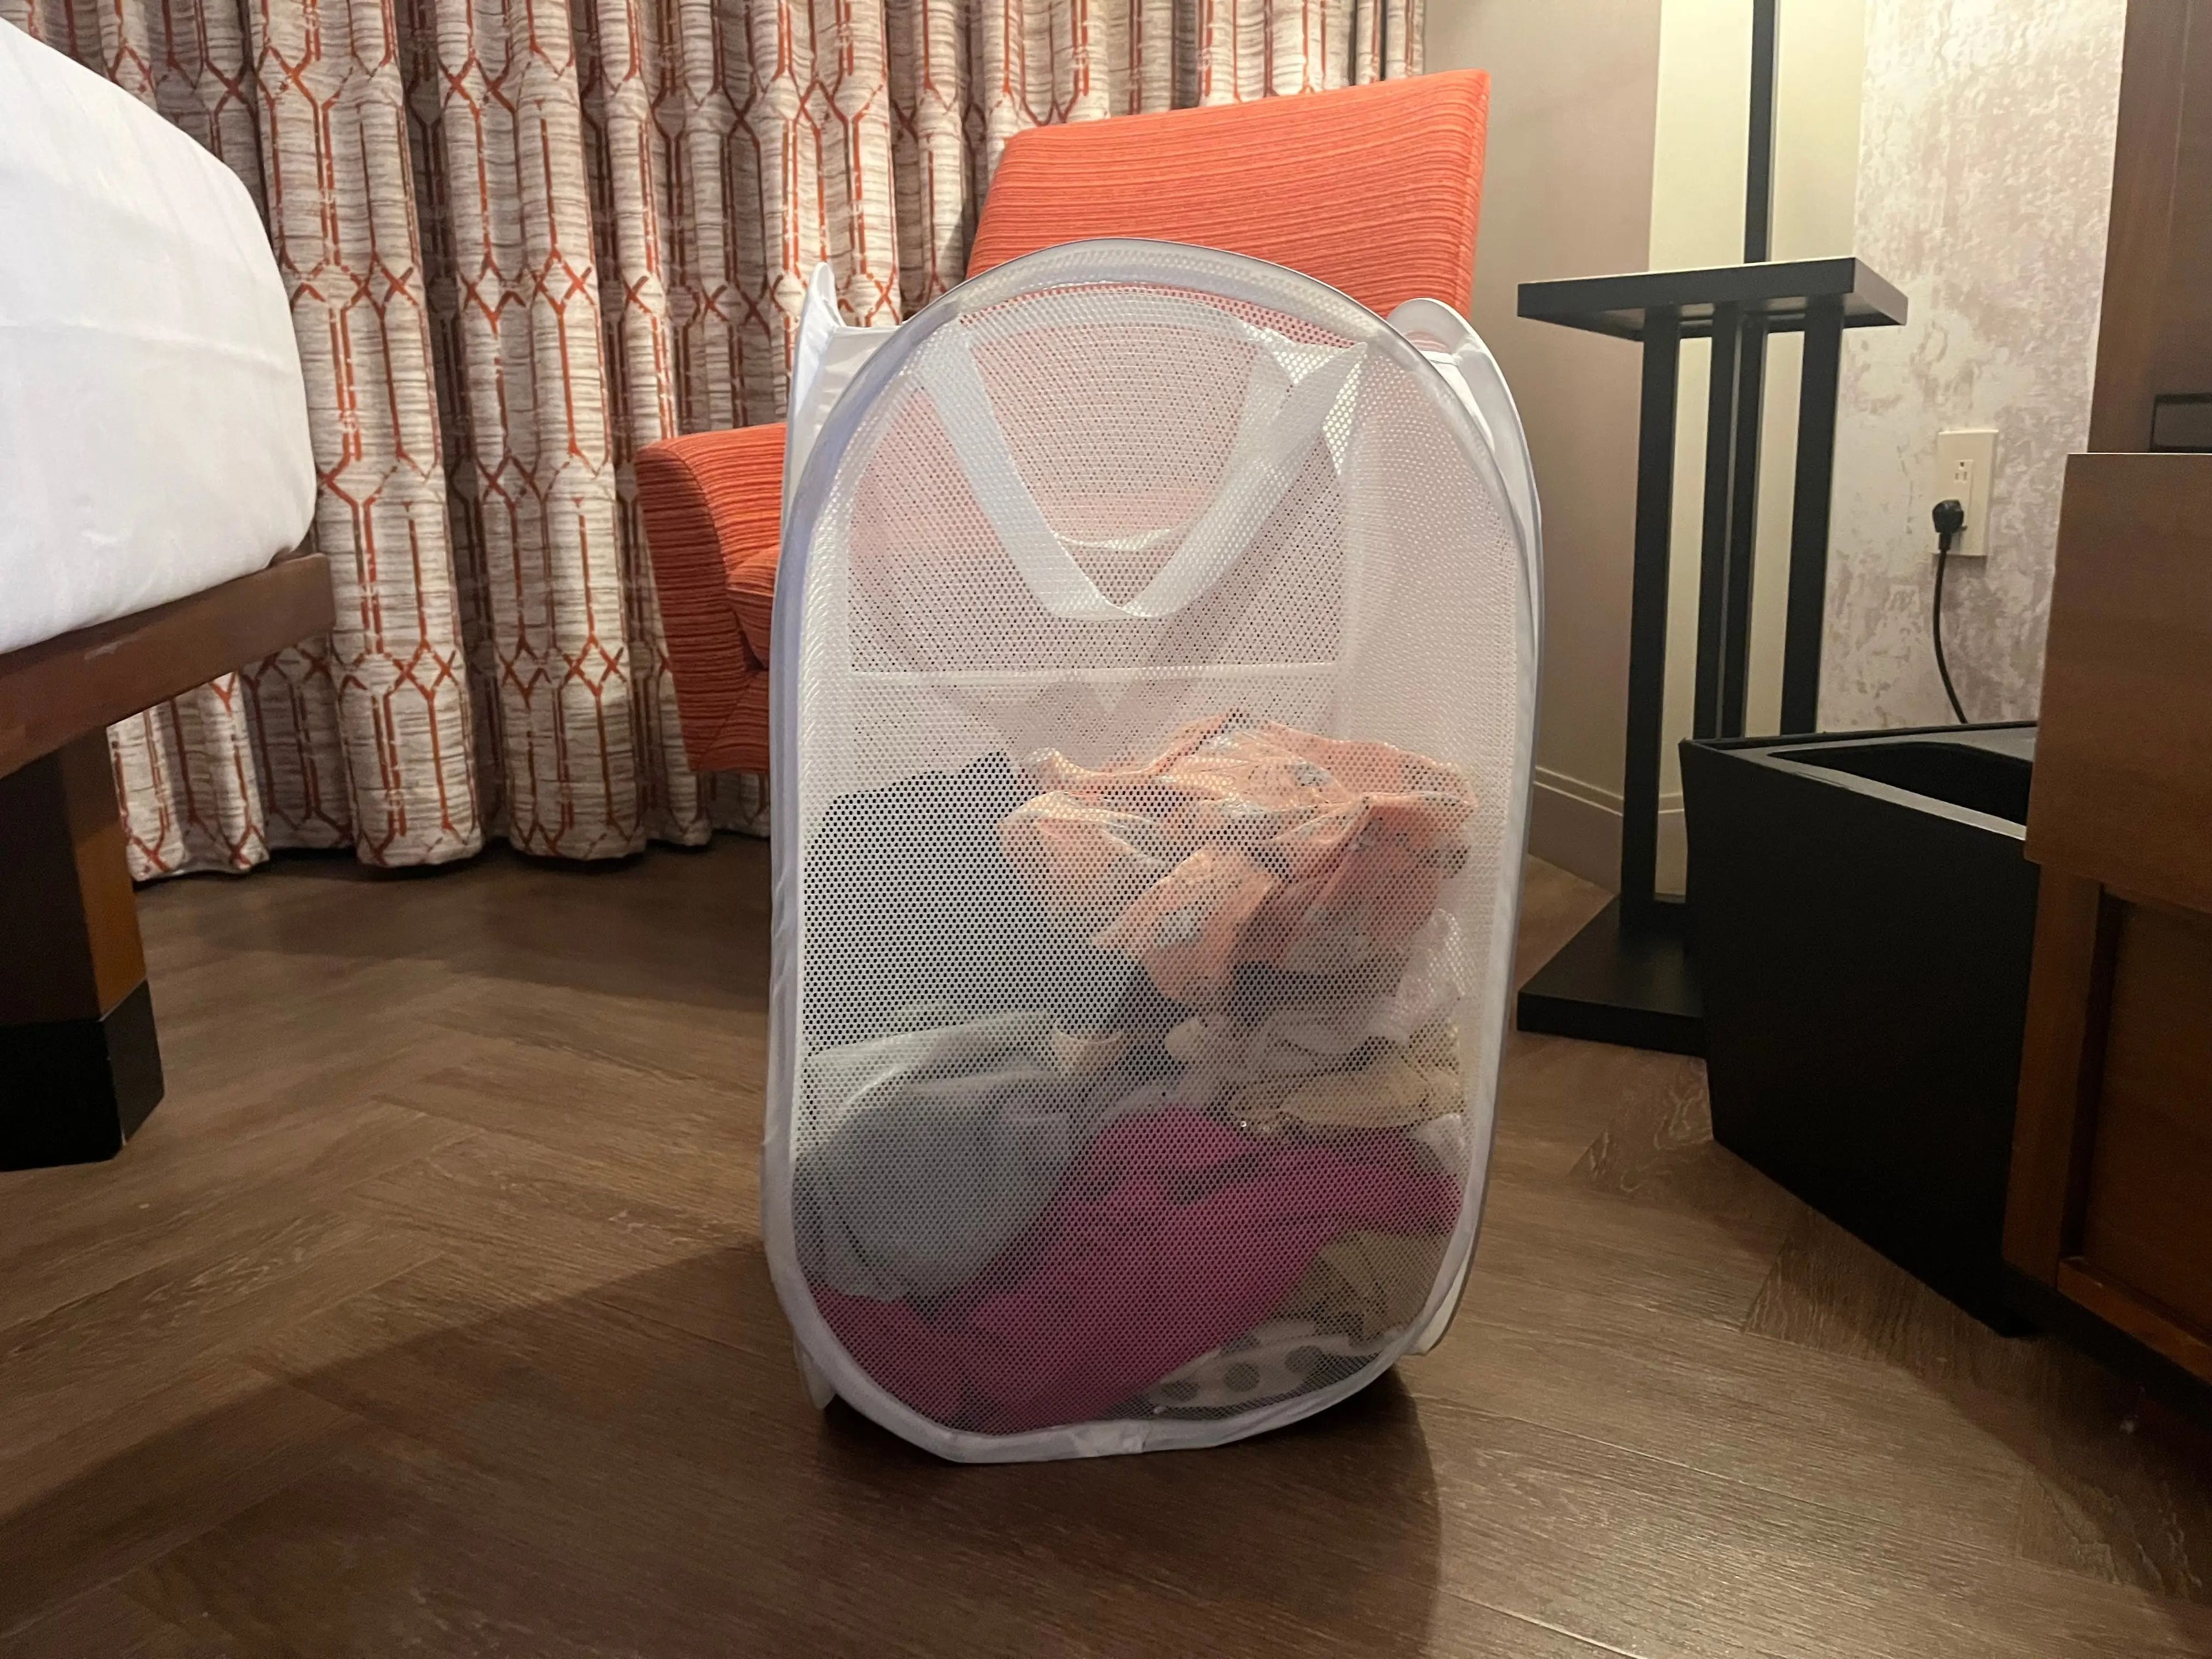 laundry basket filled with clothes in a hotel room